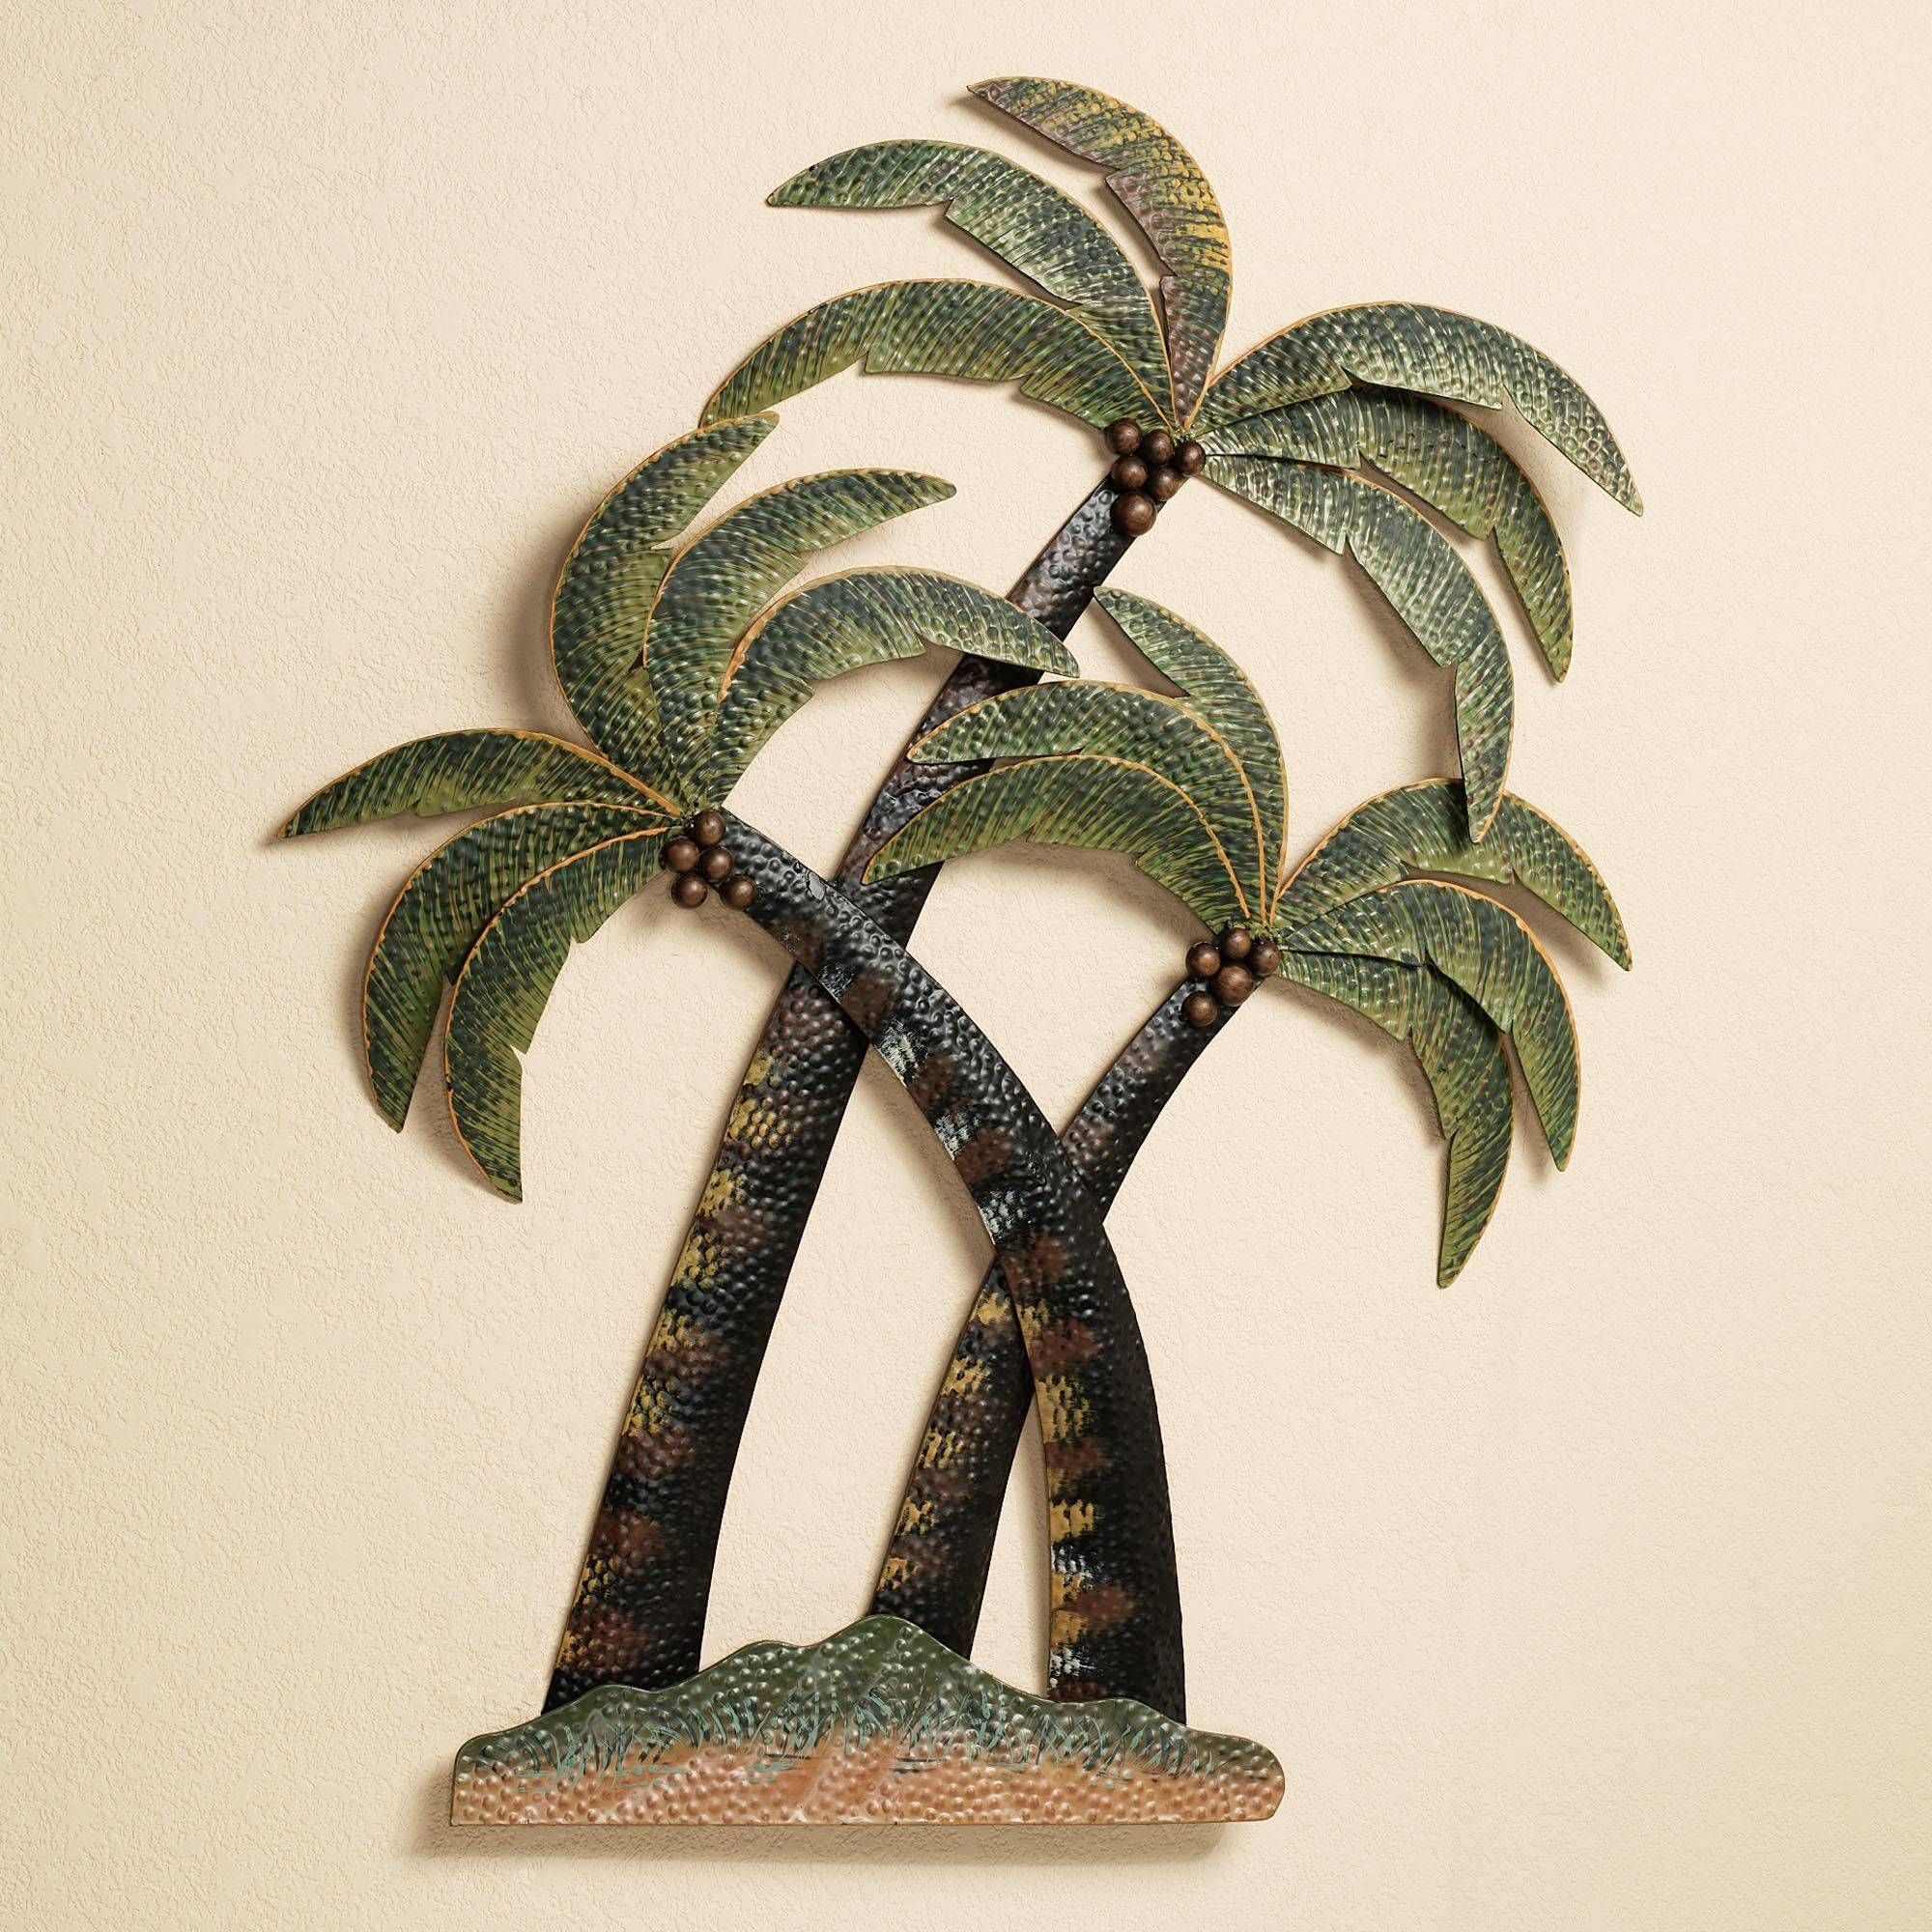 Coco Palm Tree Metal Wall Sculpture Pertaining To 2017 Palm Tree Metal Wall Art (View 1 of 20)